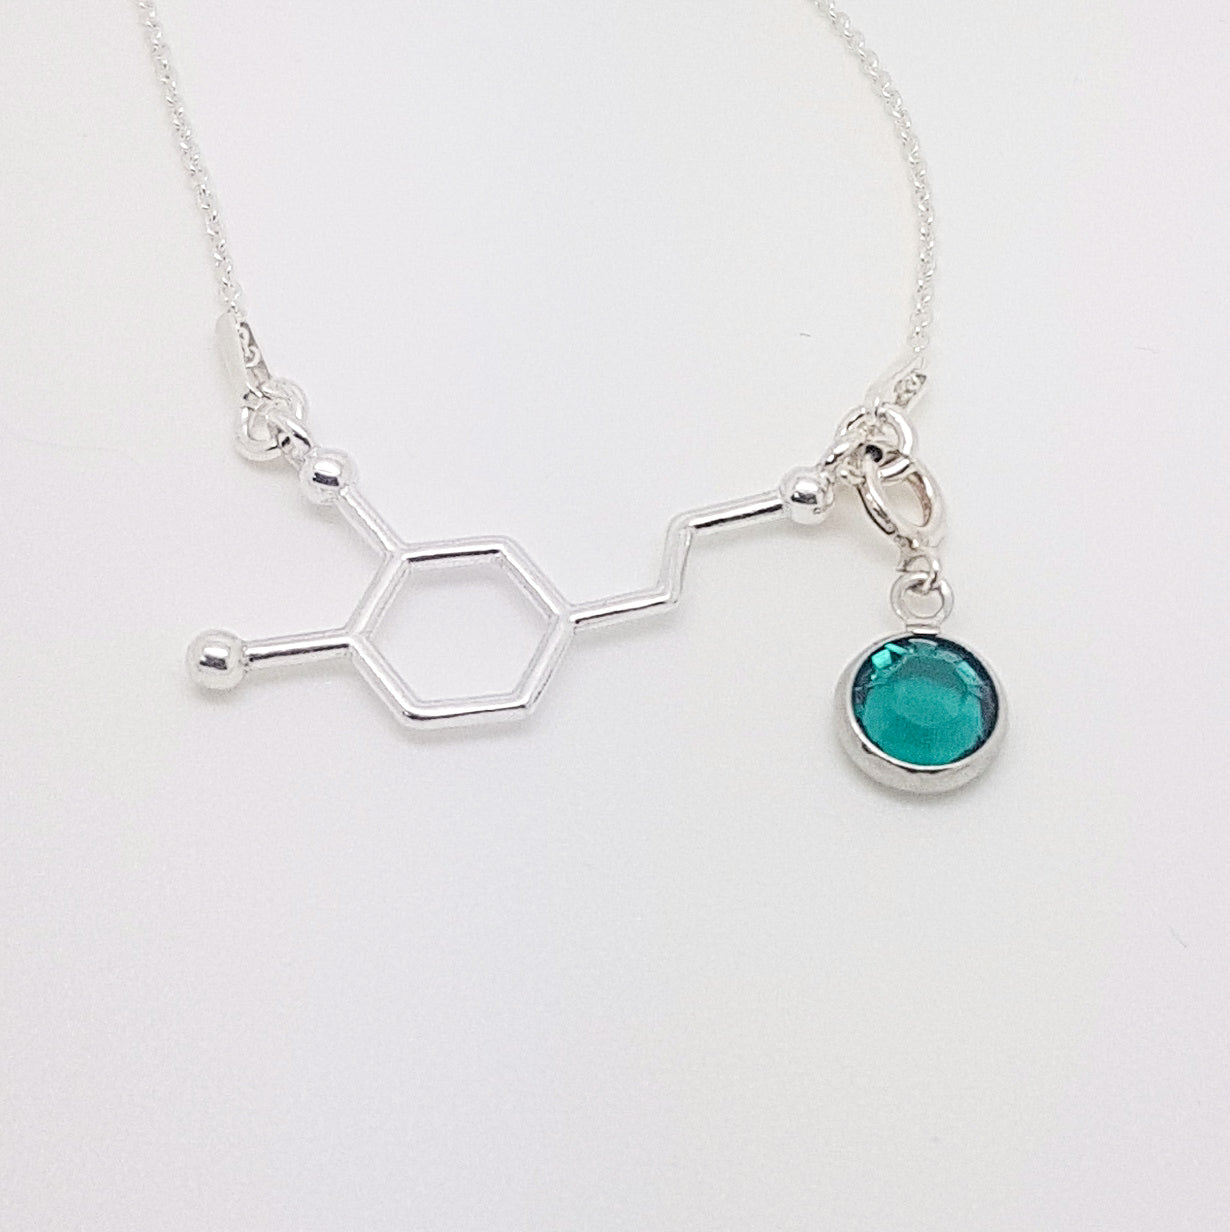 Dopamine Molecule Necklace: A striking representation of the dopamine molecule pendant in sterling silver with a birthstone charm of your choice